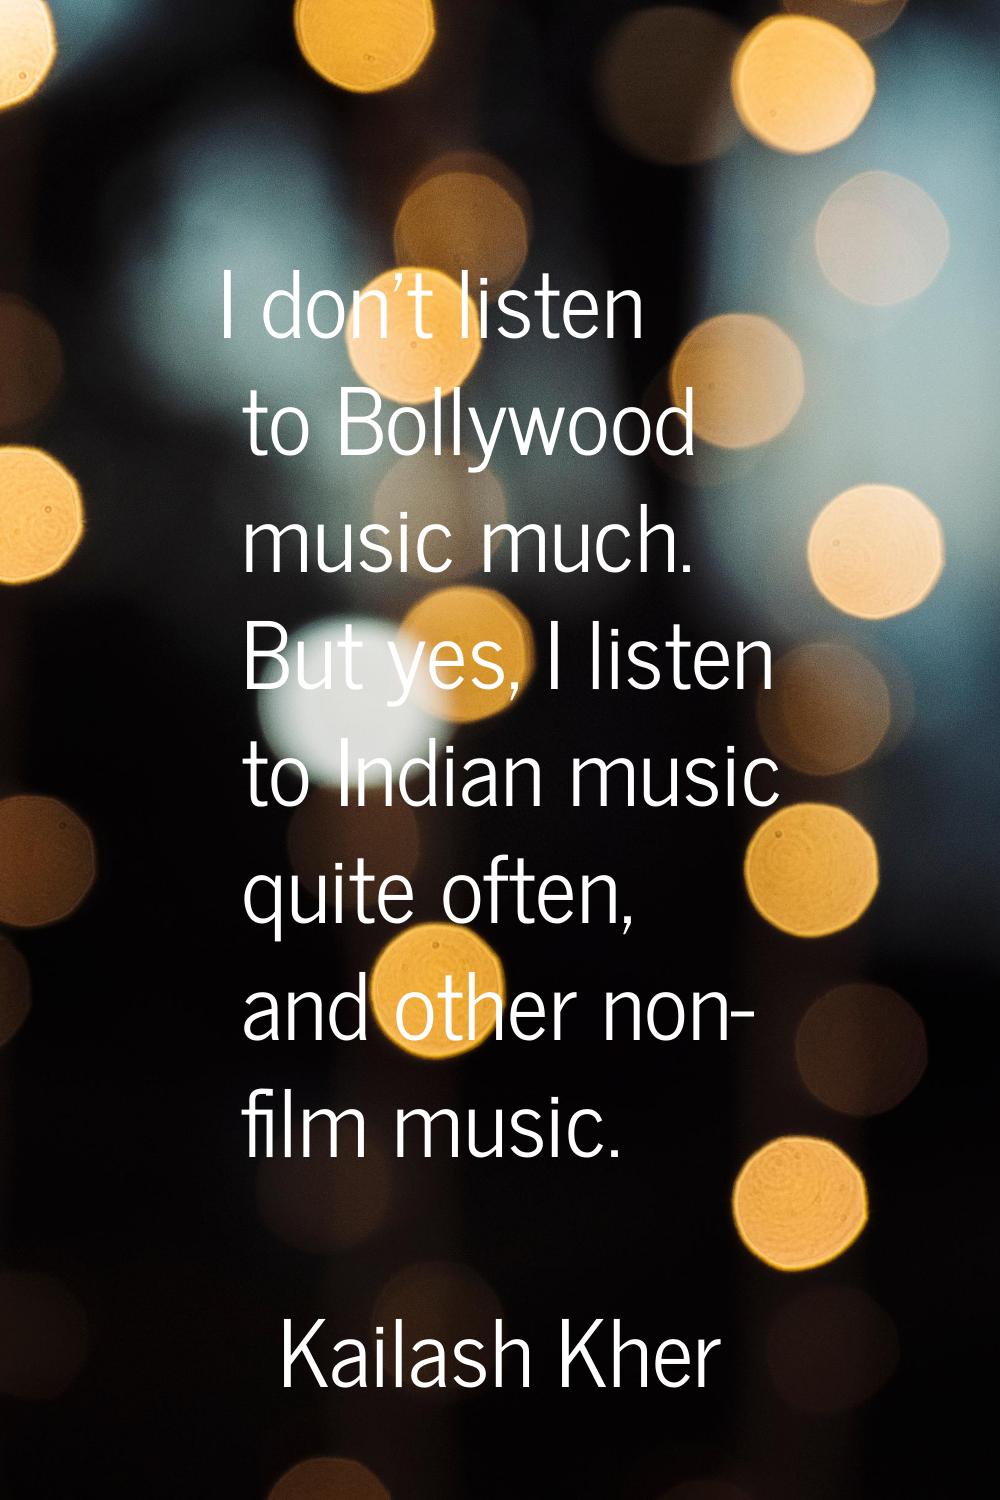 I don't listen to Bollywood music much. But yes, I listen to Indian music quite often, and other no